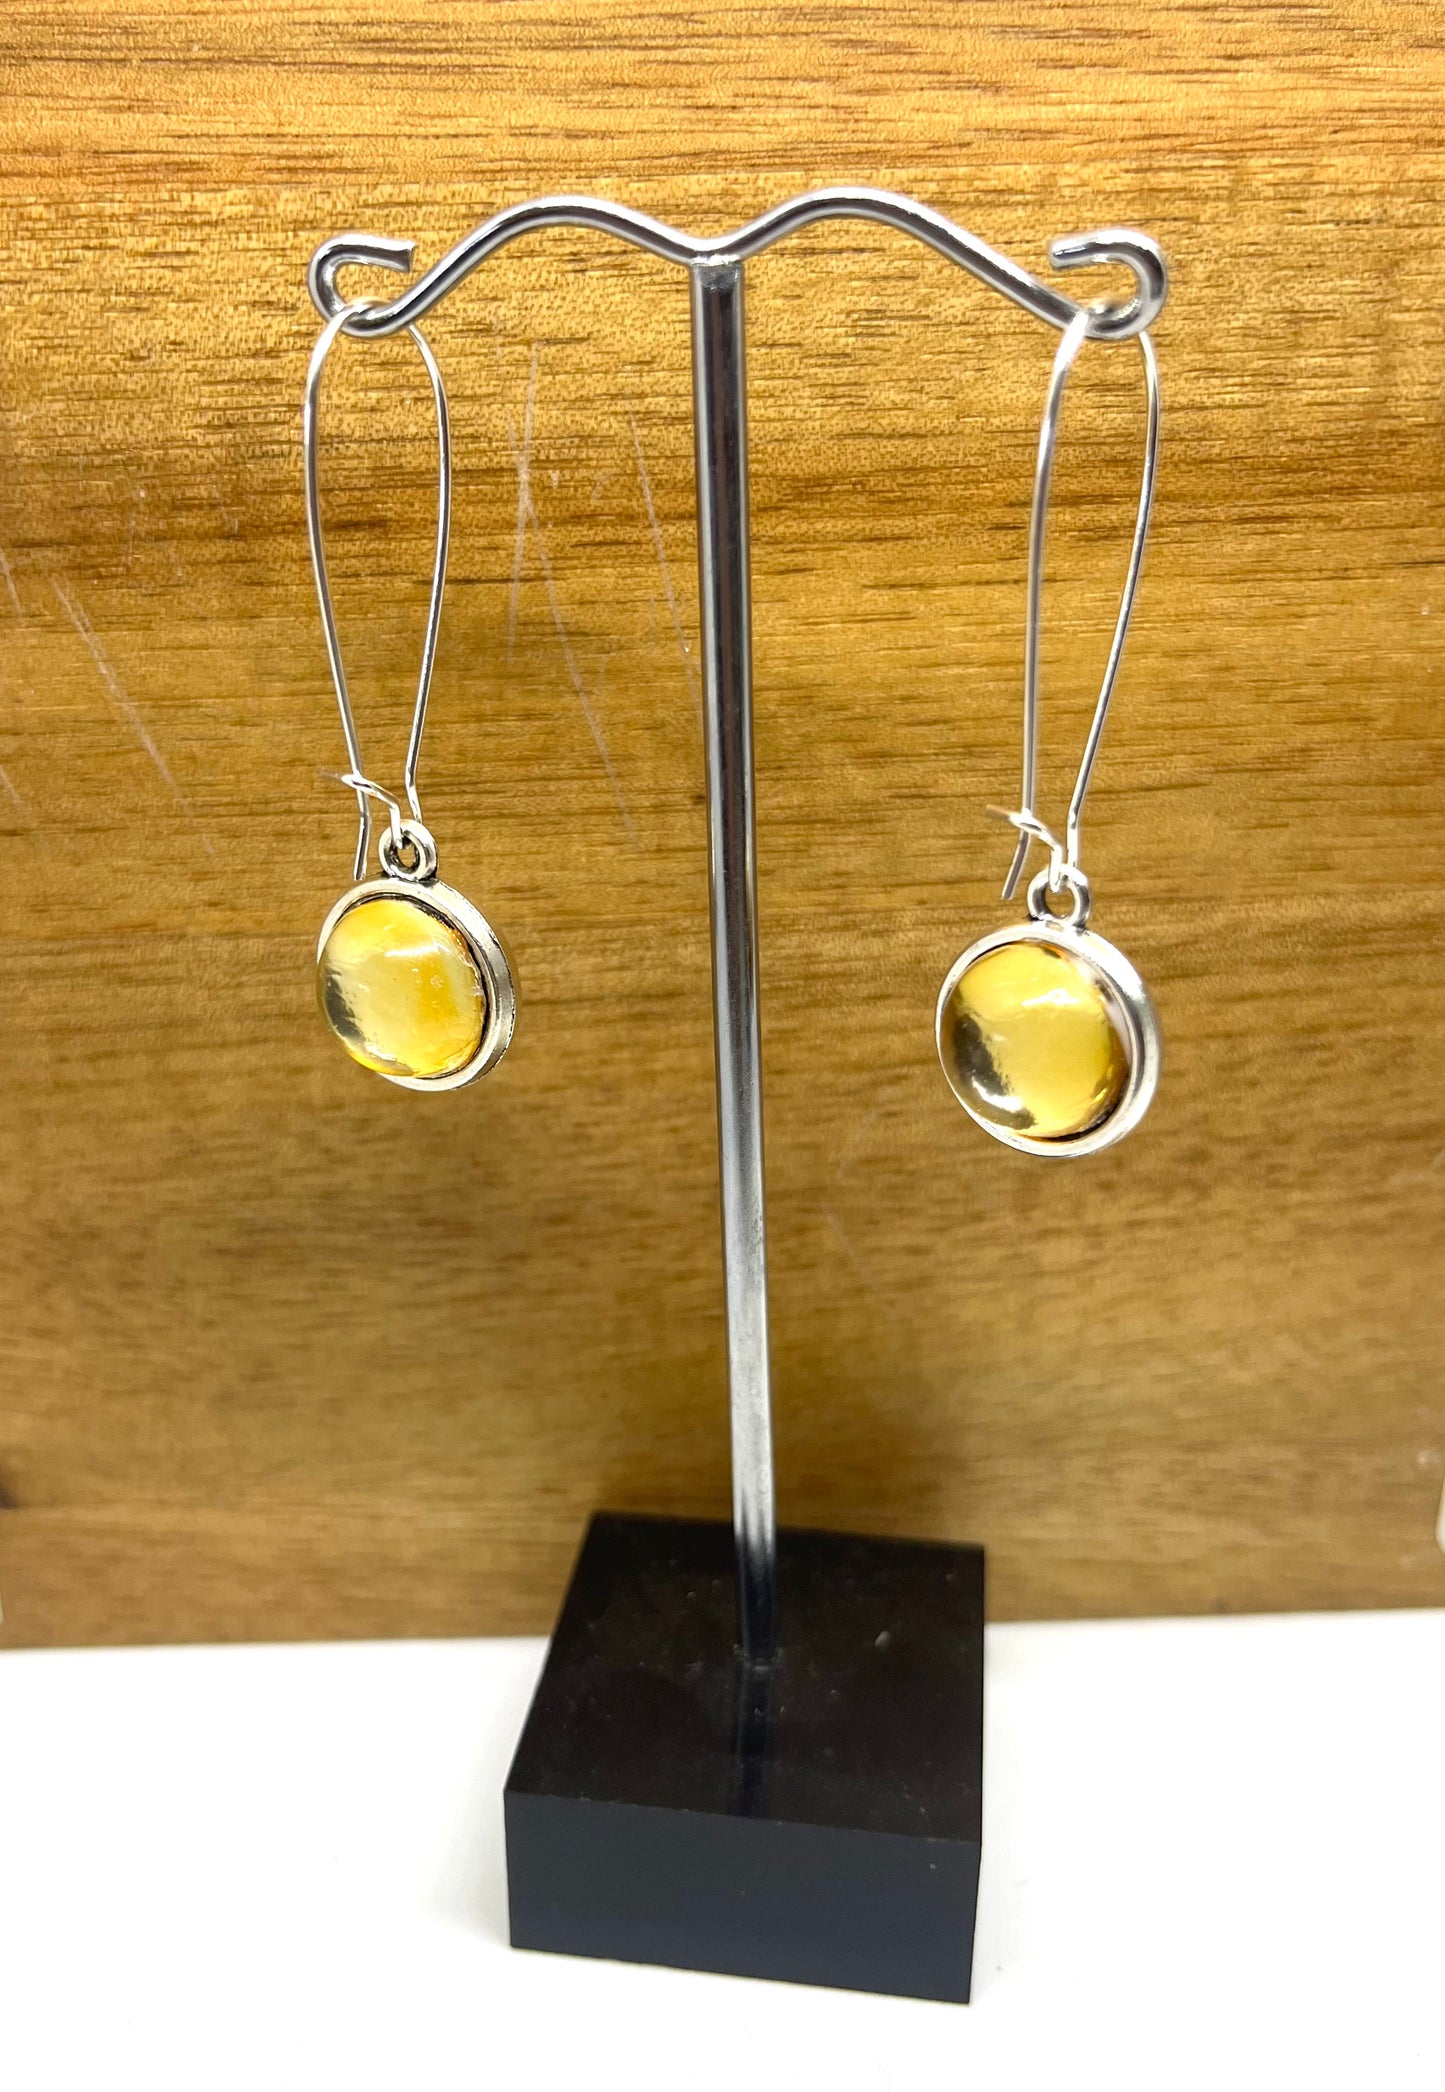 Double sided glass dome earrings with silver metallic and gold other side